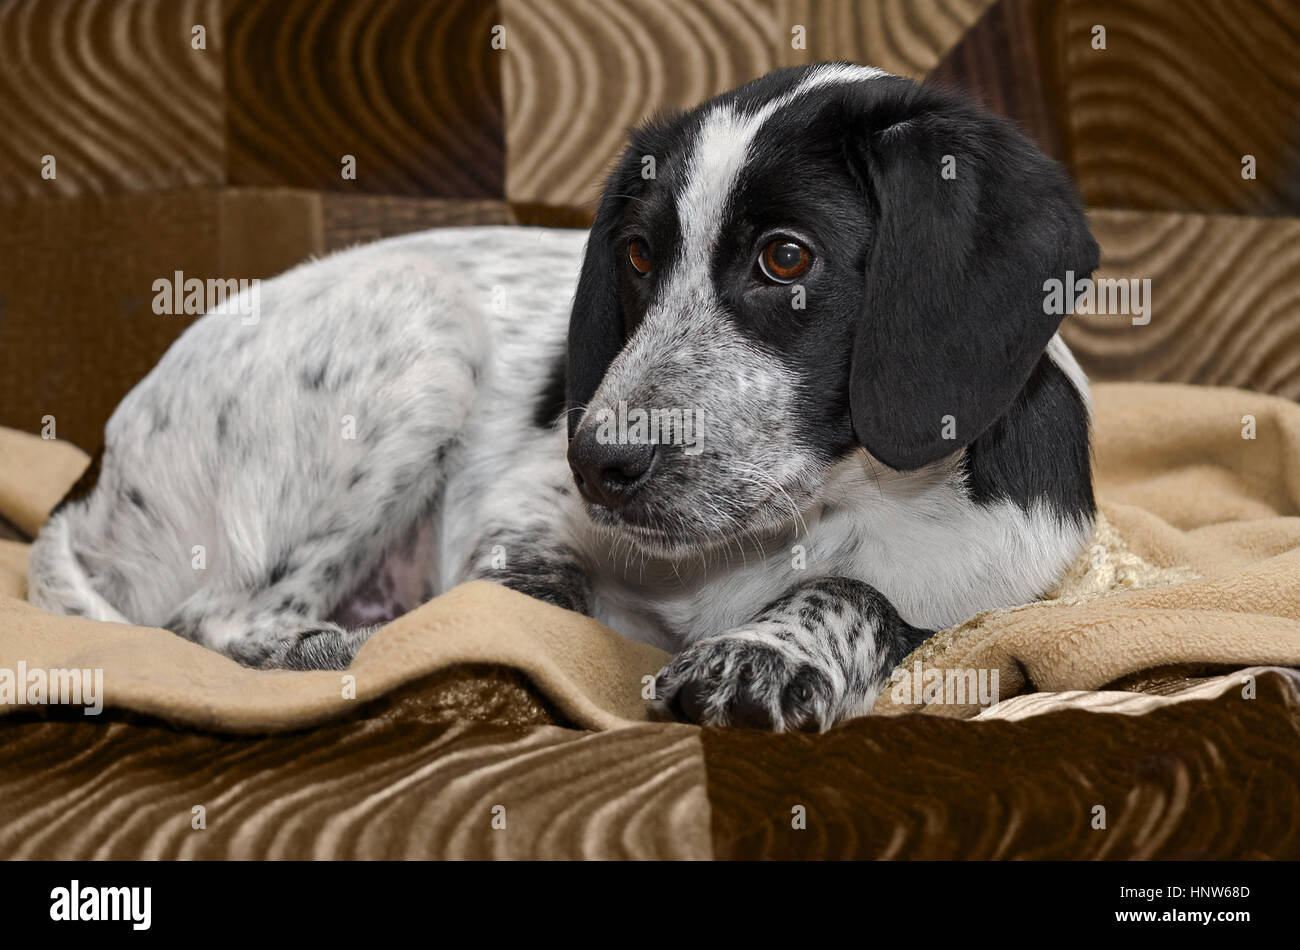 The puppy was lying sad on the couch. Selective focus. Stock Photo